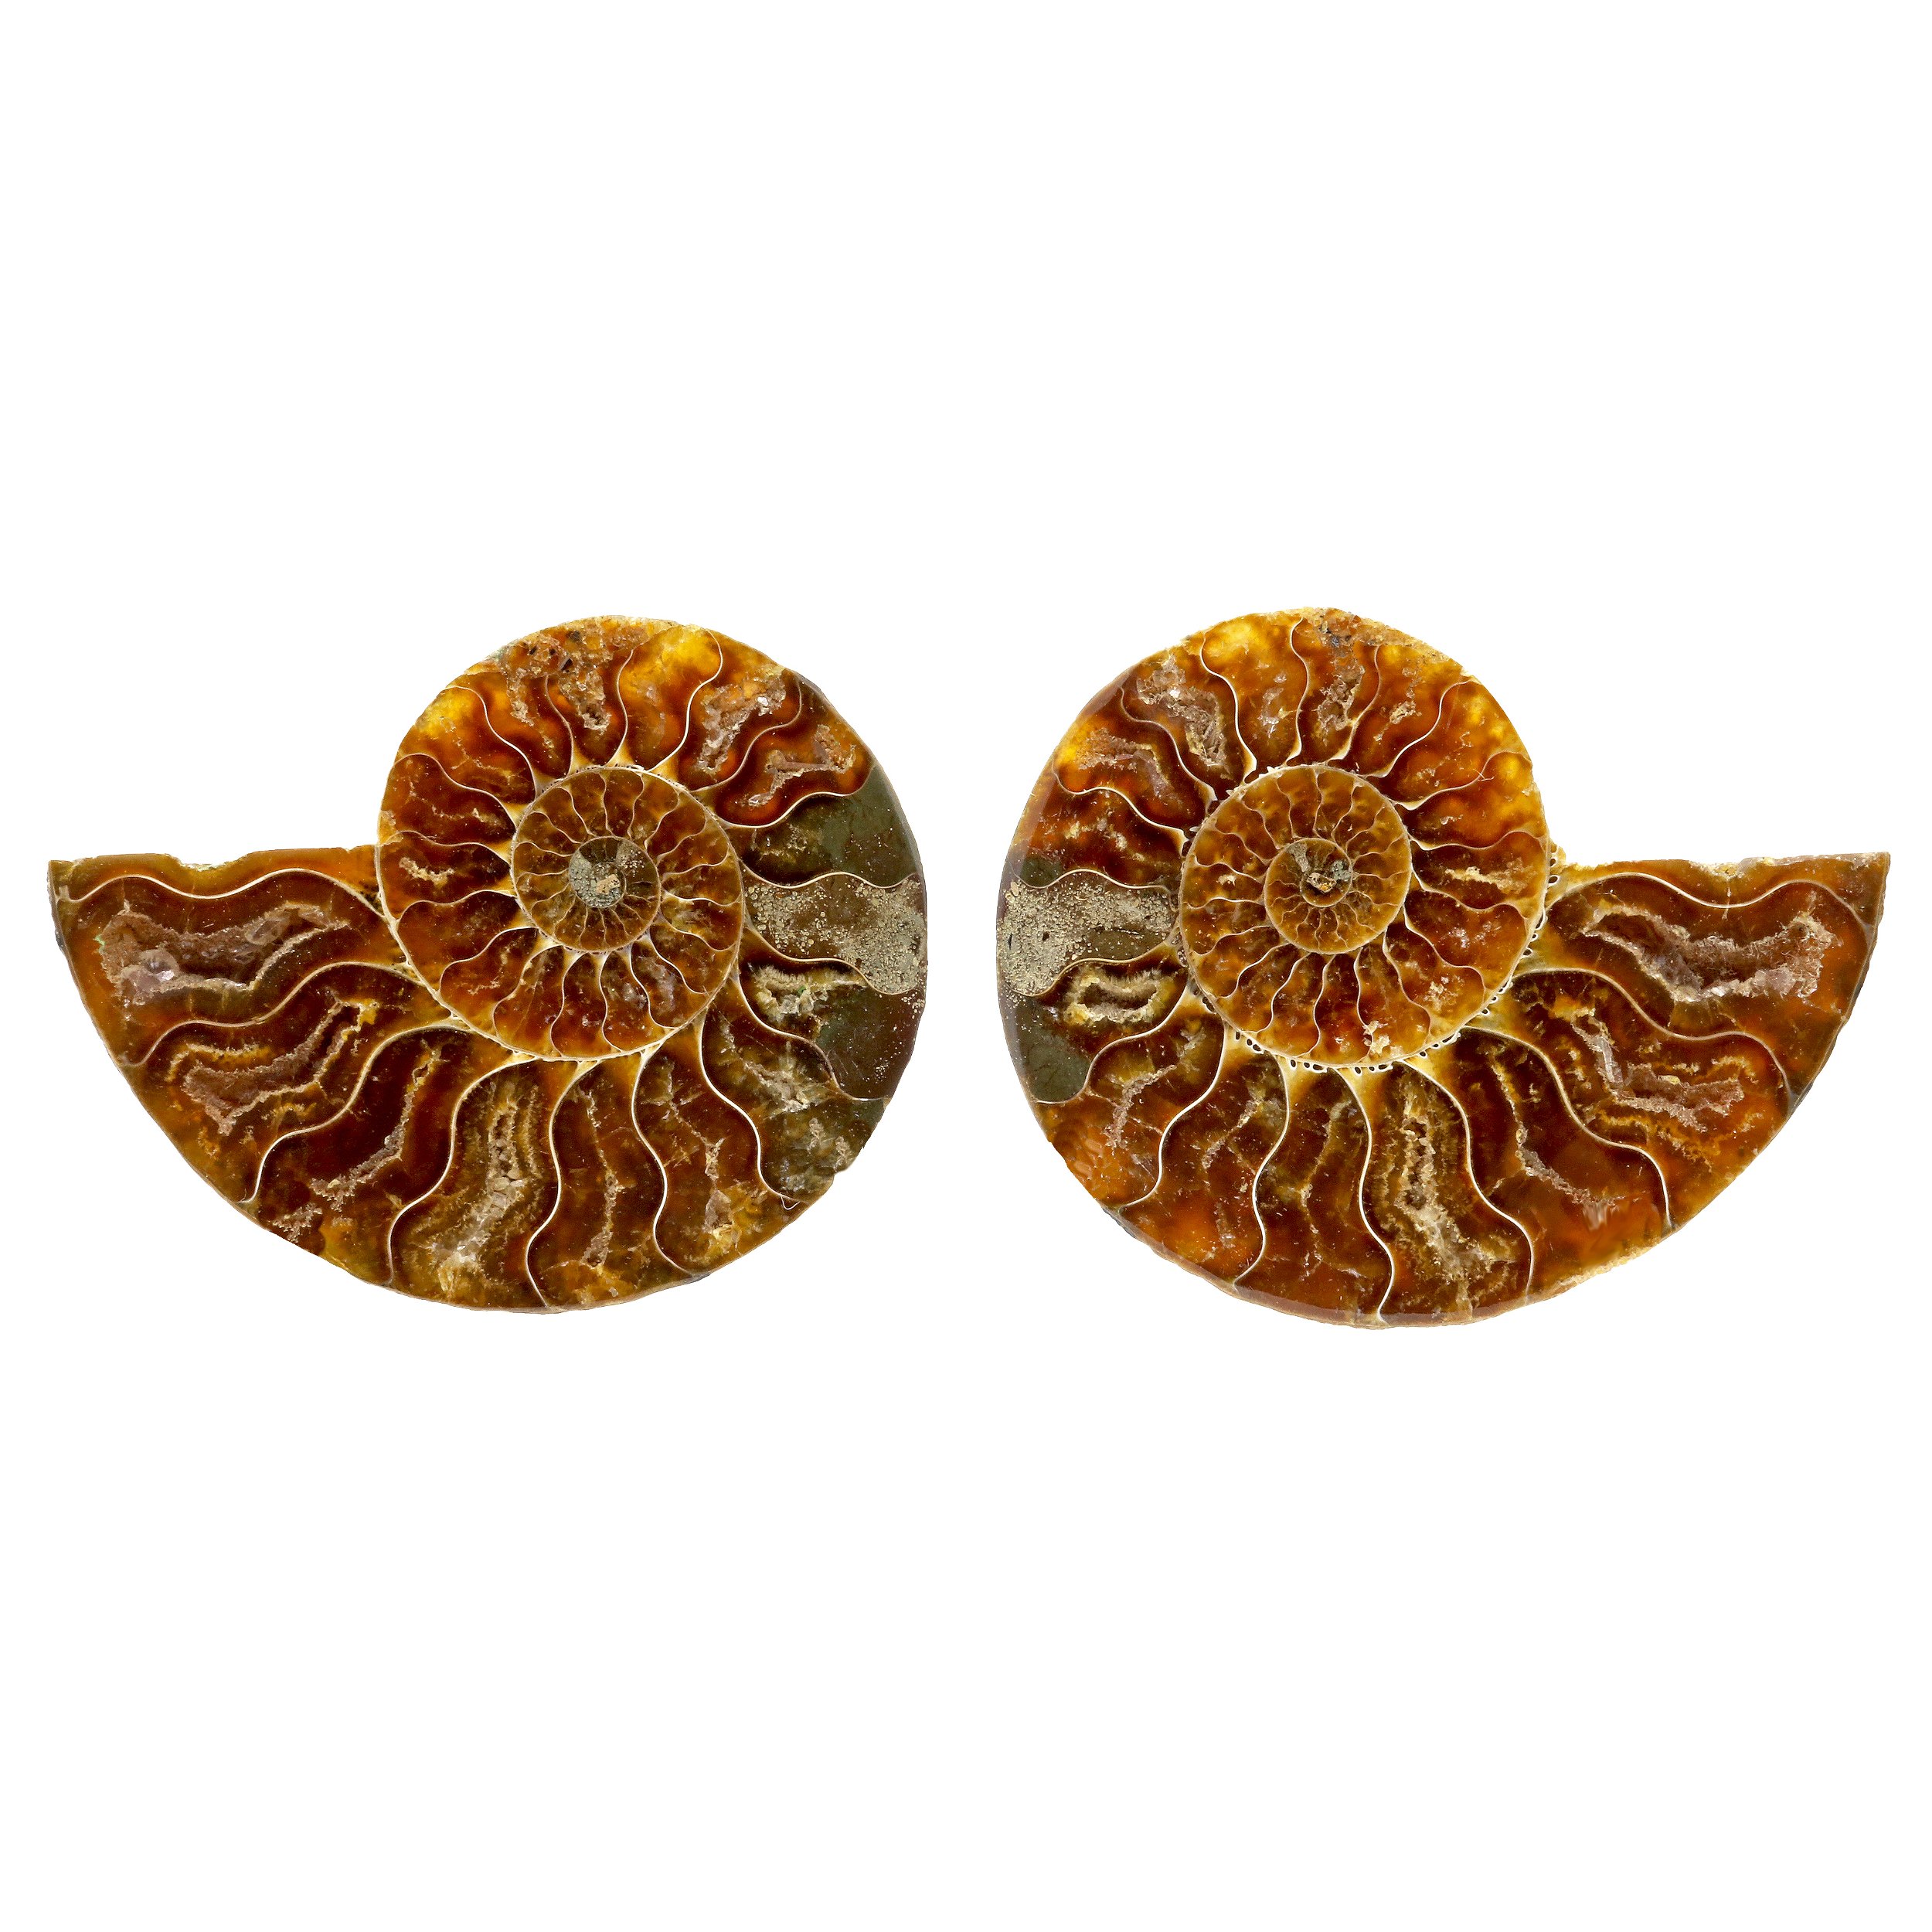 Ammonite Fossil Pair In Acrylic Stands - Red Opalescent Back